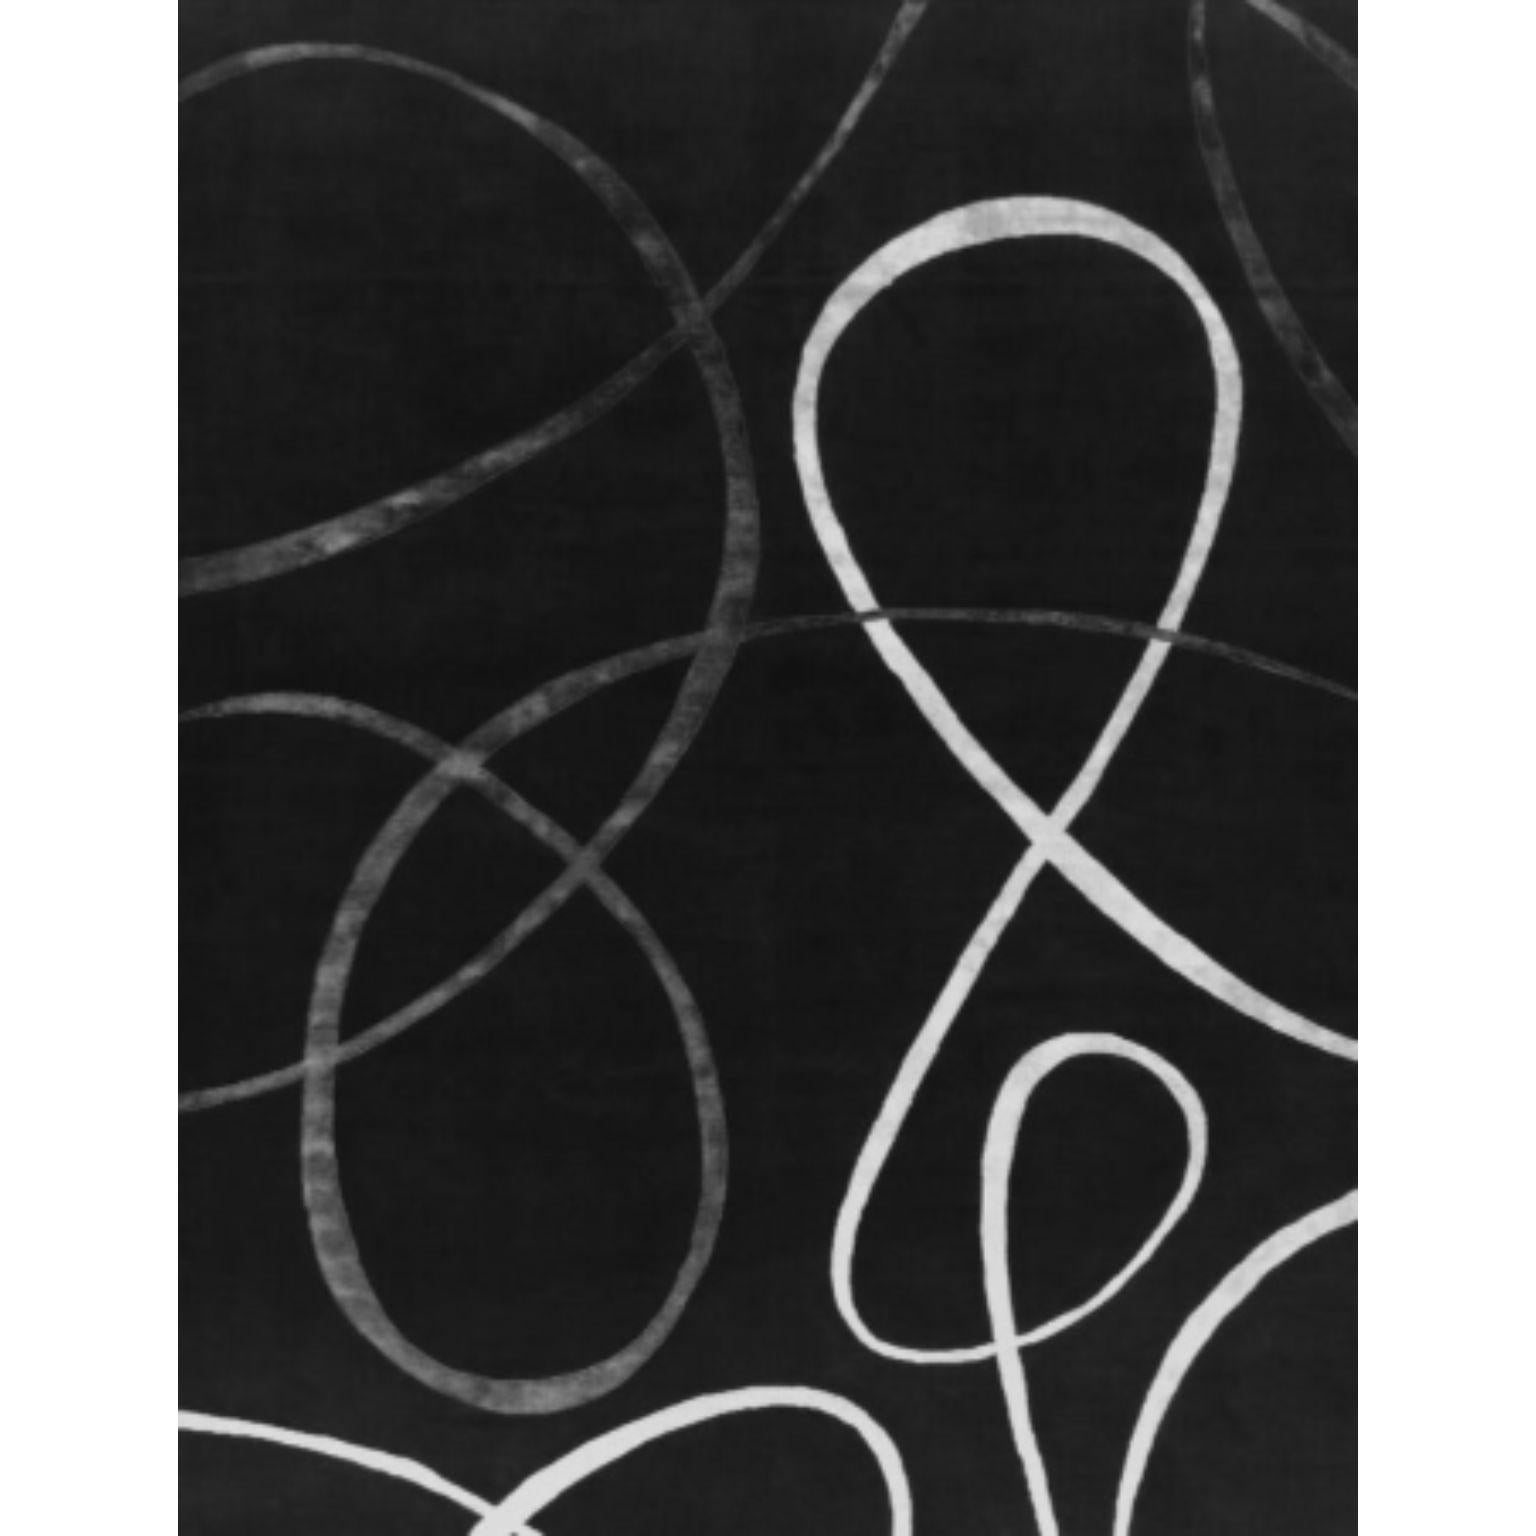 CURLY 200 rug by Illulian
Dimensions: D 300 x H 200 cm 
Materials: Wool 80%, silk 20%
Variations available and prices may vary according to materials and sizes.

Illulian, historic and prestigious rug company brand, internationally renowned in